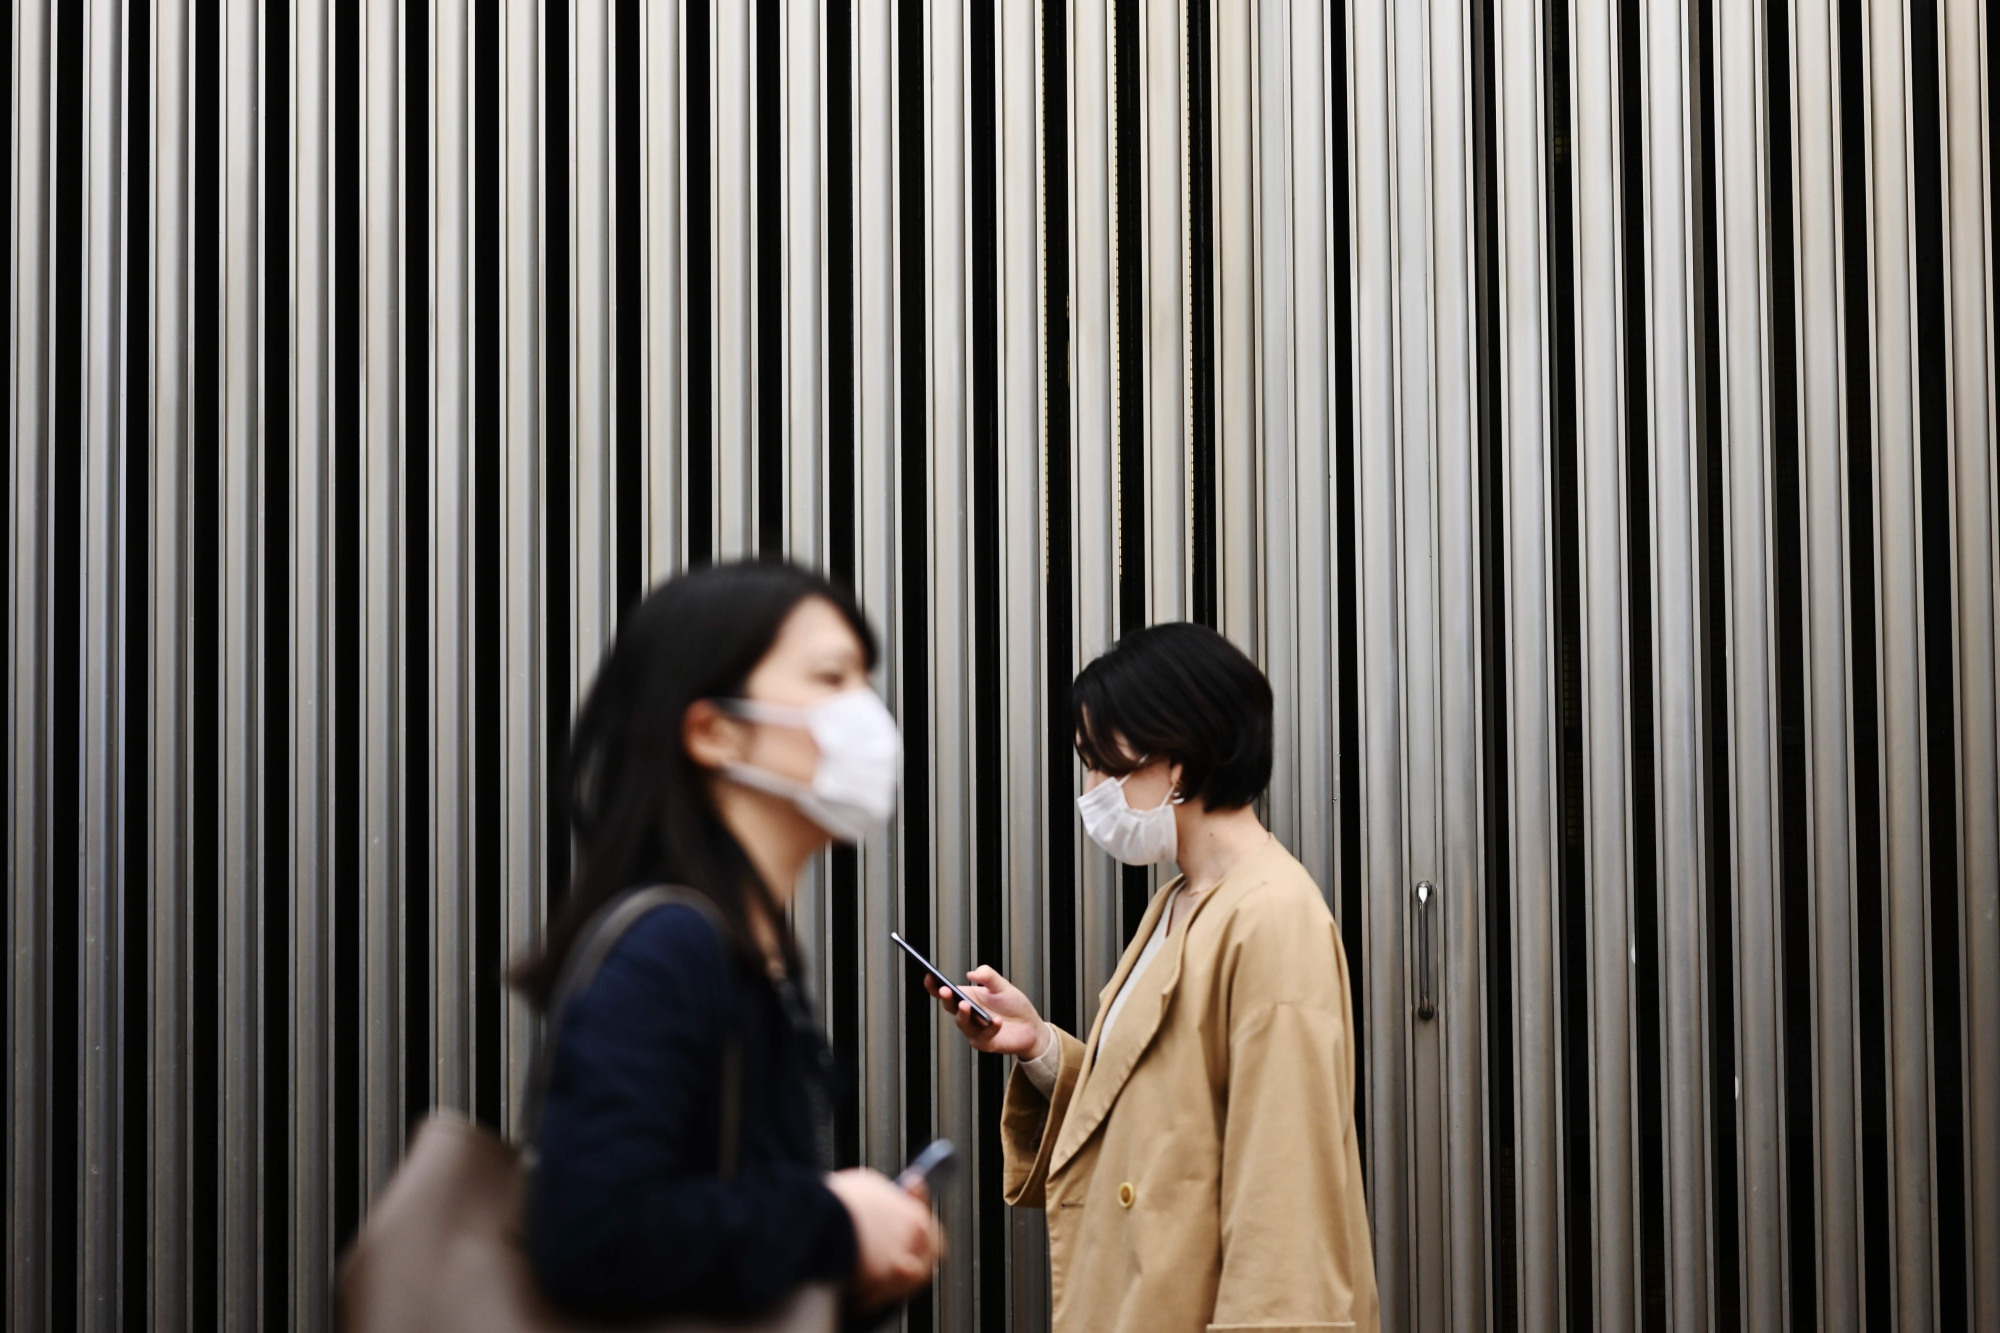 People wear face masks amid concerns over COVID-19 in Tokyo's Yurakucho district on Wednesday. Health experts have been puzzled as to why Japan is still seeing a relatively low number of infections from the deadly virus outbreak so far. | AFP-JIJI